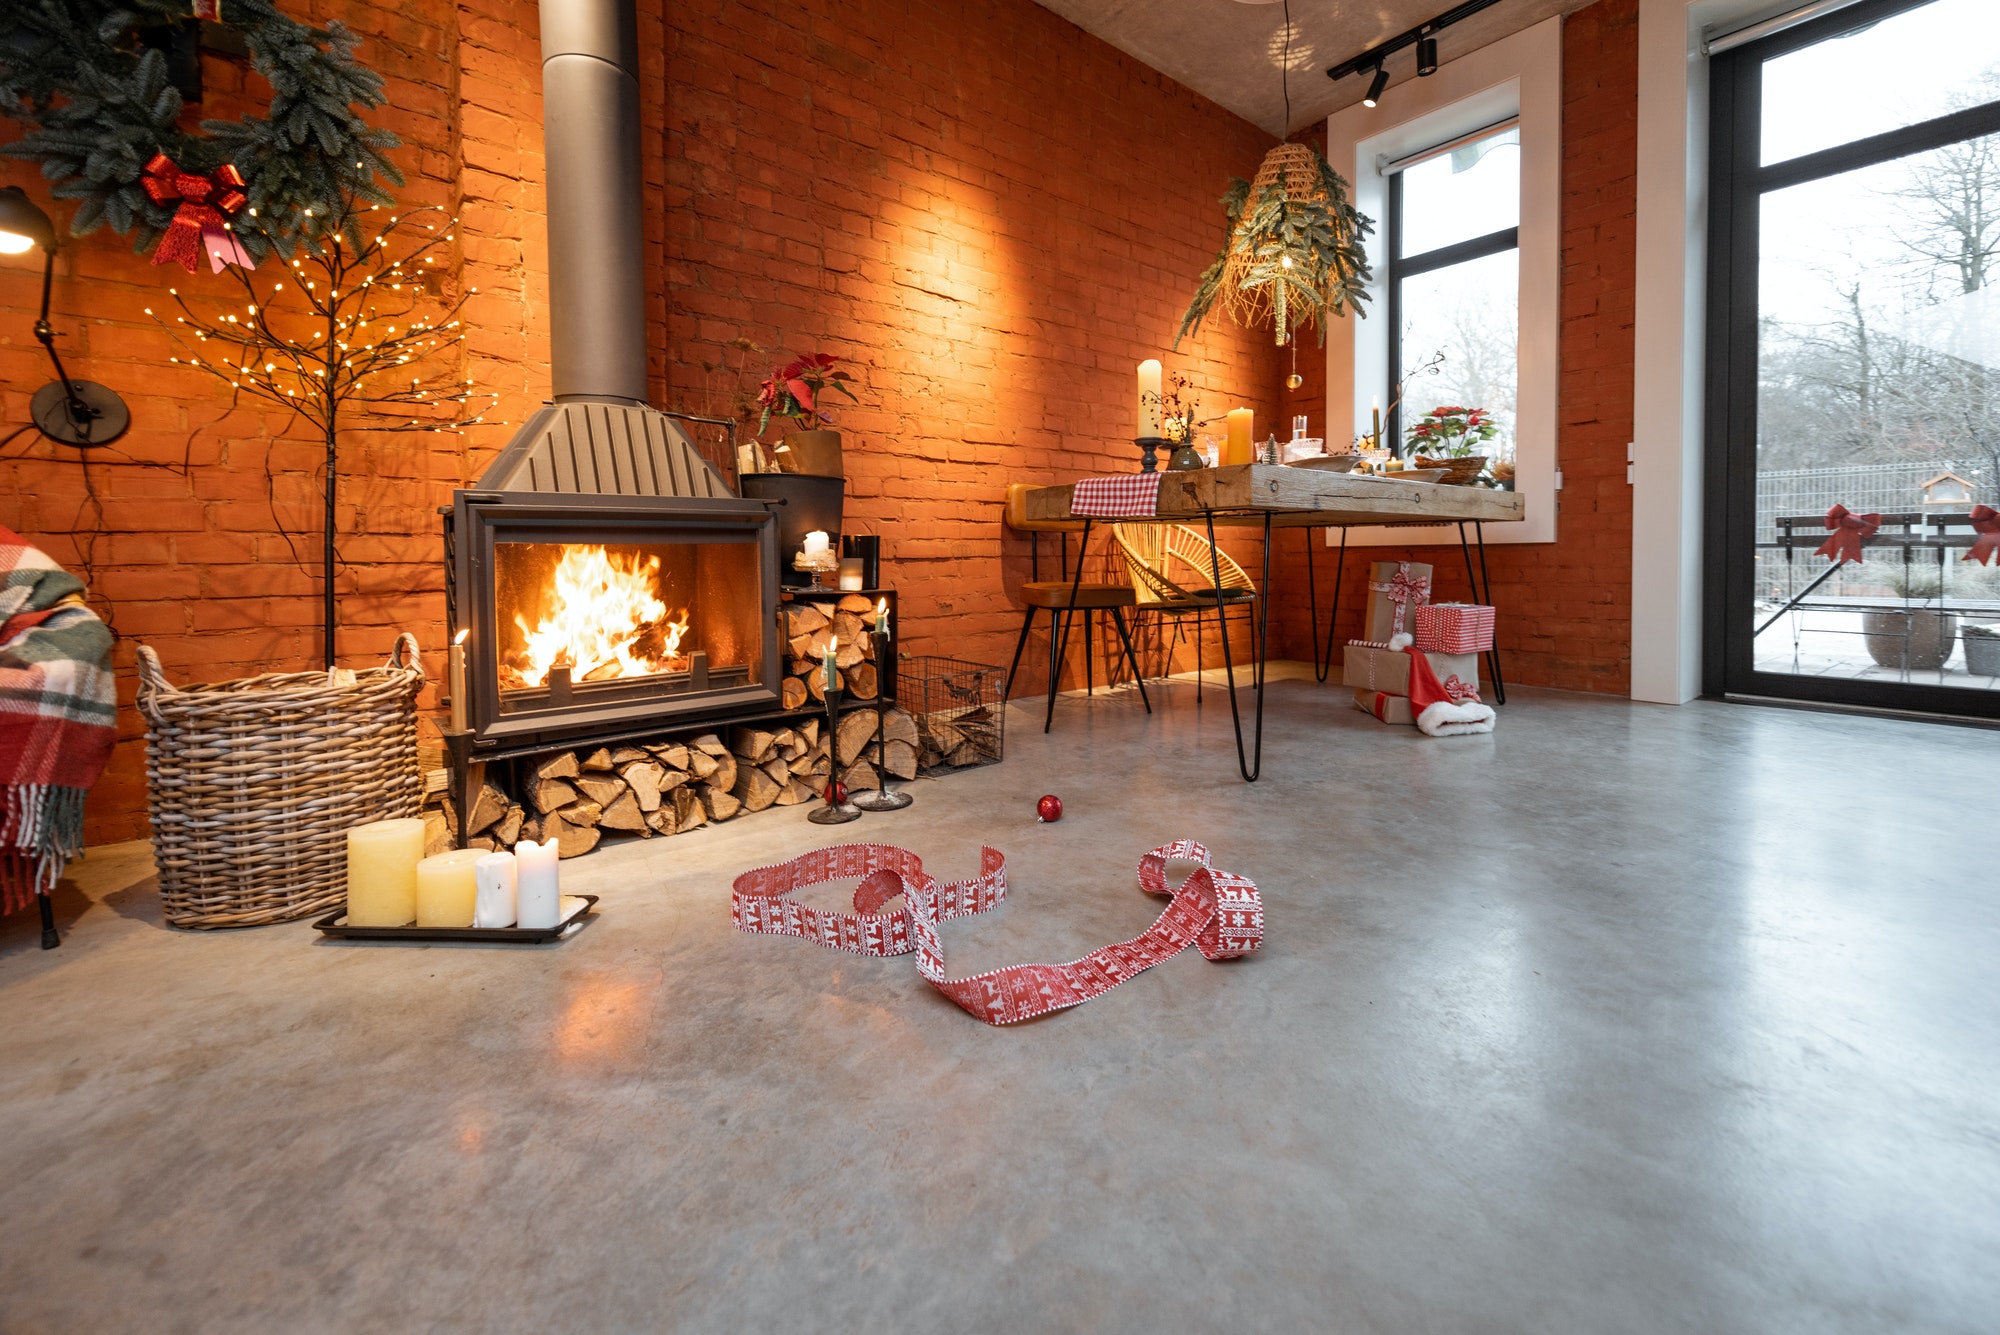 Festively decorated fireplace area of the house